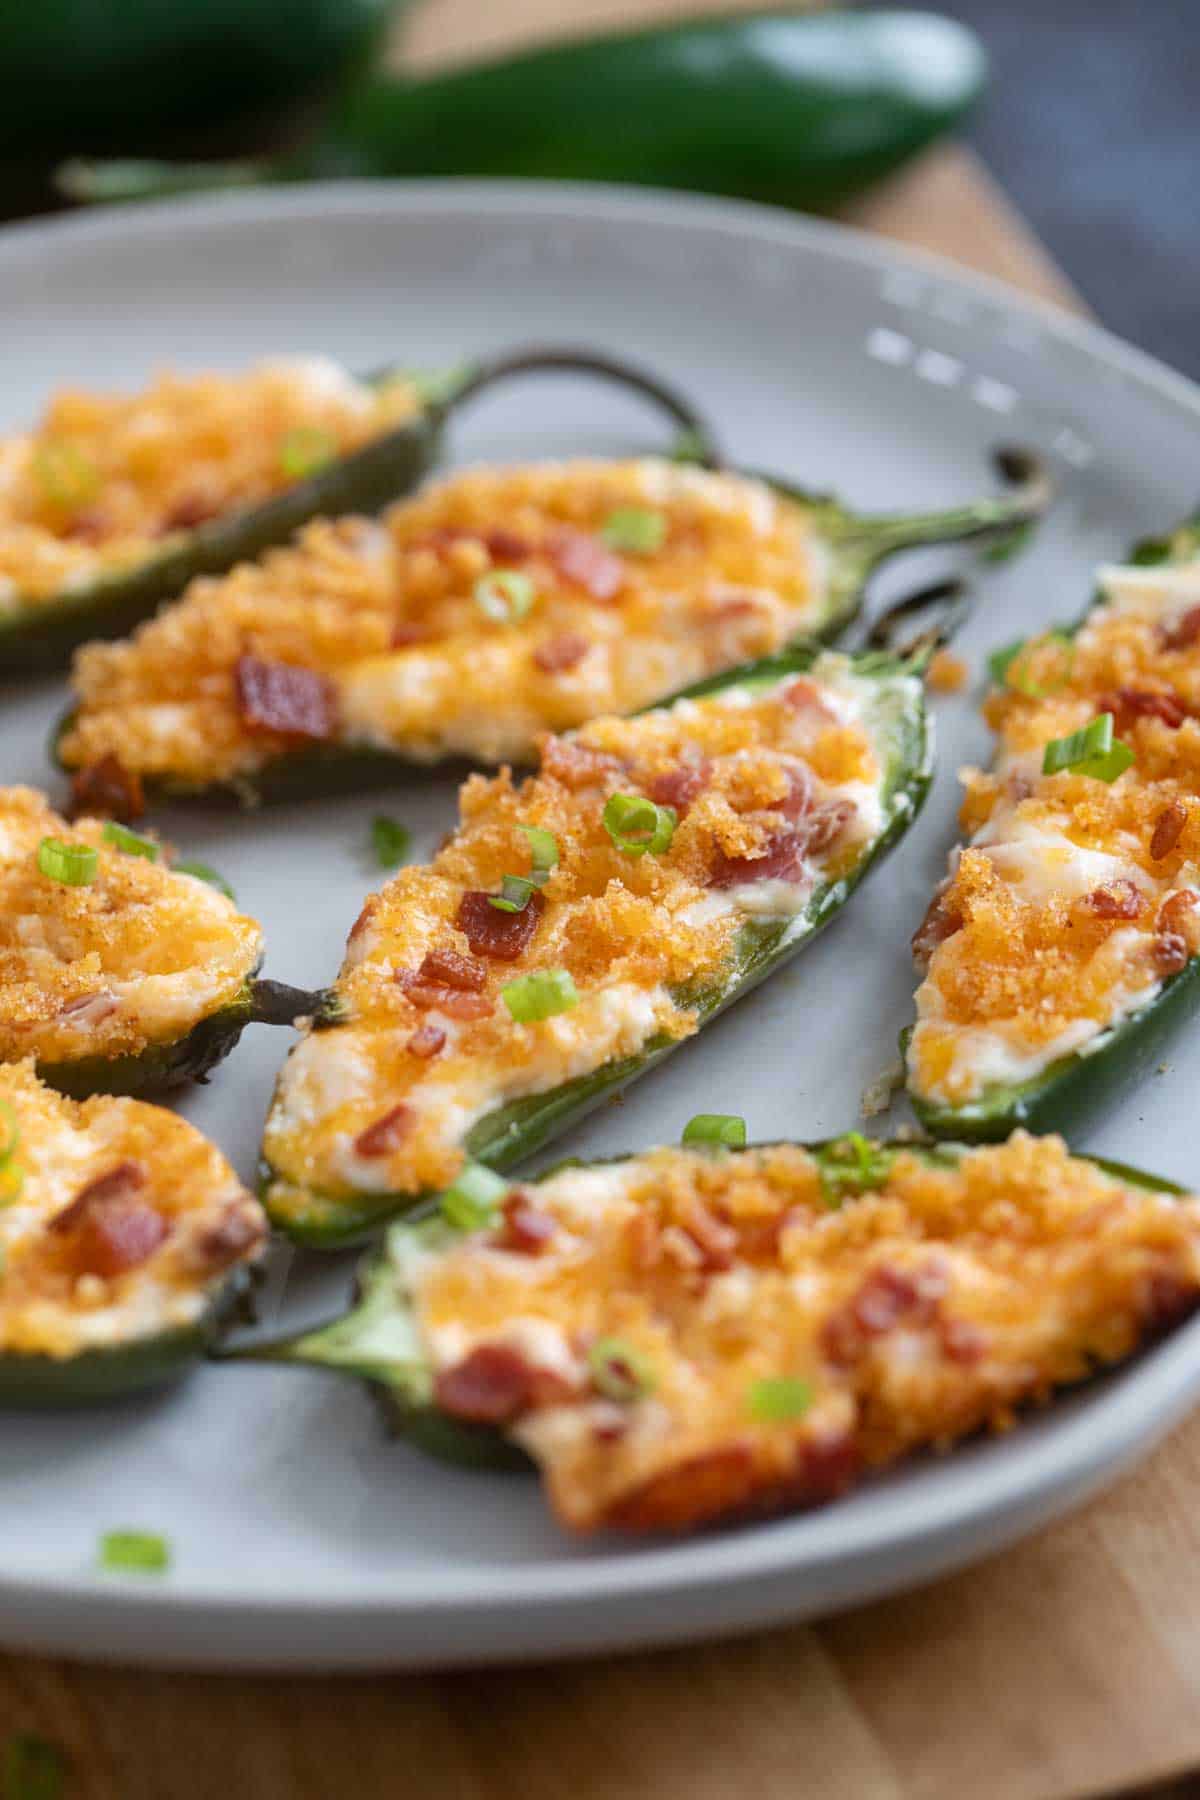 Jalapeño Poppers topped with breadcrumbs and bacon.